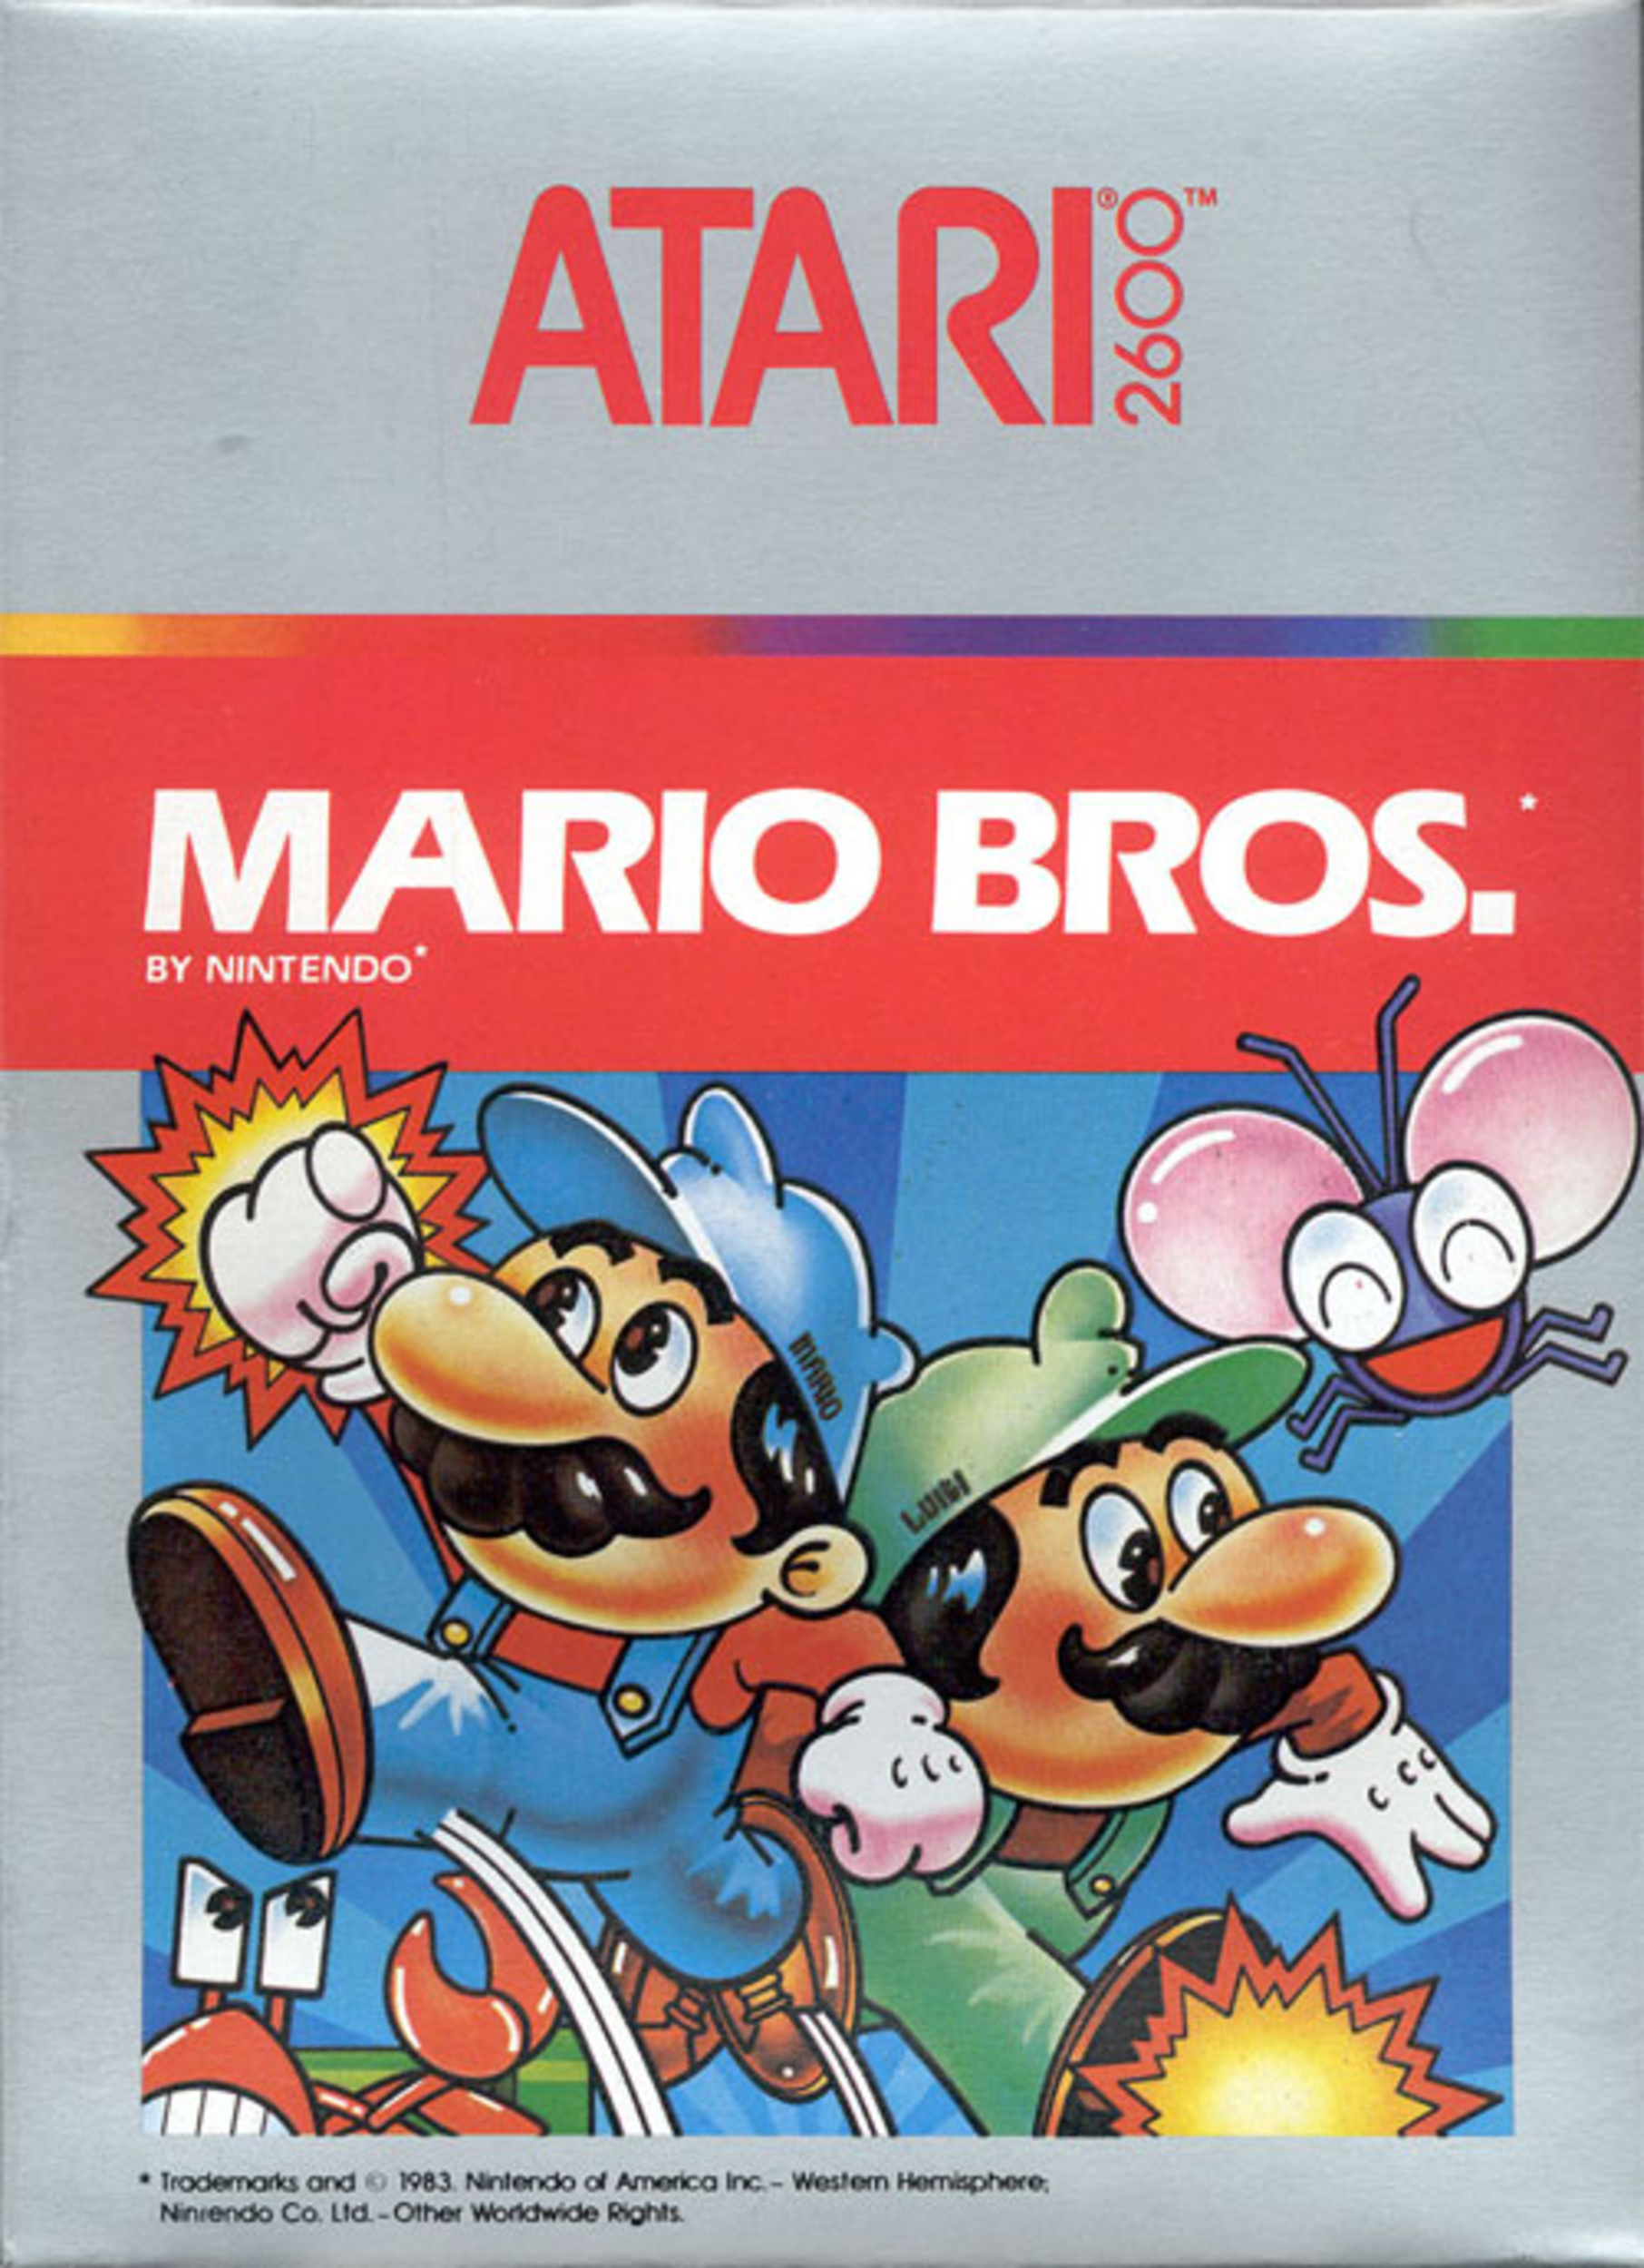 <p>The <em>Mario Bros.</em> arcade game only takes place on one screen, but the action is just as fast as any other Super Mario game. The Brooklyn plumber brothers are attempting to clear plagues of critters from an underground sewer by punching the level ground below them and jumping on platforms to knock them off the screen. Nothing looks the way it's supposed to in this Atari cartridge port. The enemies look nothing like Koopa Troopas, and the crabs look like bits of driftwood with legs. The "POW" block is just...well, a block. Worst of all, the controls and movement play more like one of those LCD handheld games from the '90s.</p><p>You may also like: <a href='https://www.yardbarker.com/entertainment/articles/the_greatest_yacht_rock_songs_of_all_time_040624/s1__38322620'>The greatest Yacht Rock songs of all time</a></p>